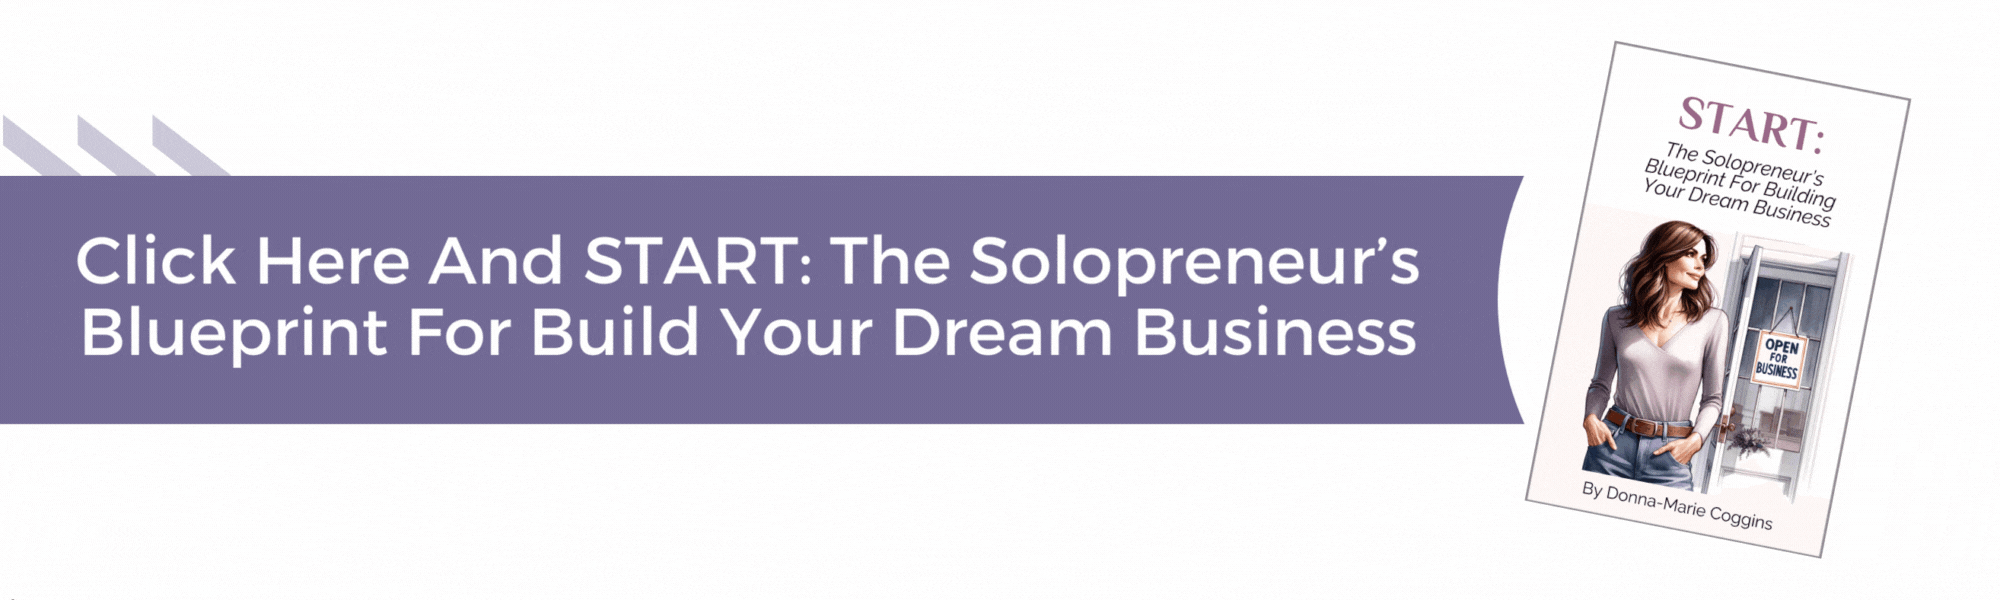 START: The Solopreneur's Blueprint To Build Your Dream Business